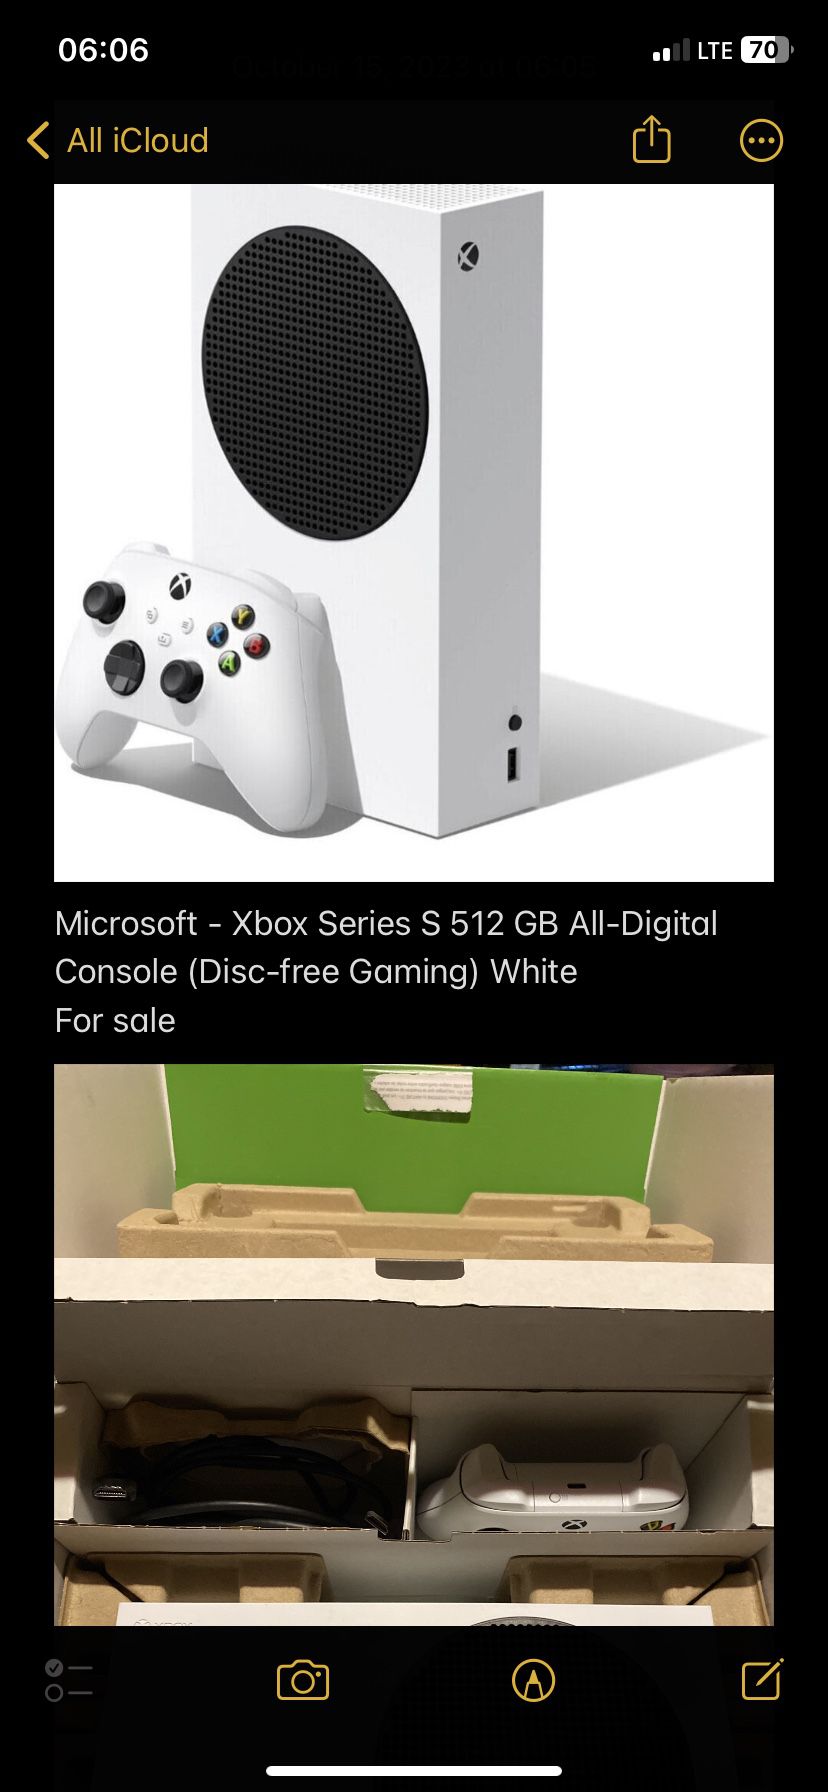 Getting Rid Of His Stuff! Microsoft - Xbox Series S 512 GB All-Digital Console (Disc-free Gaming) White For sale  